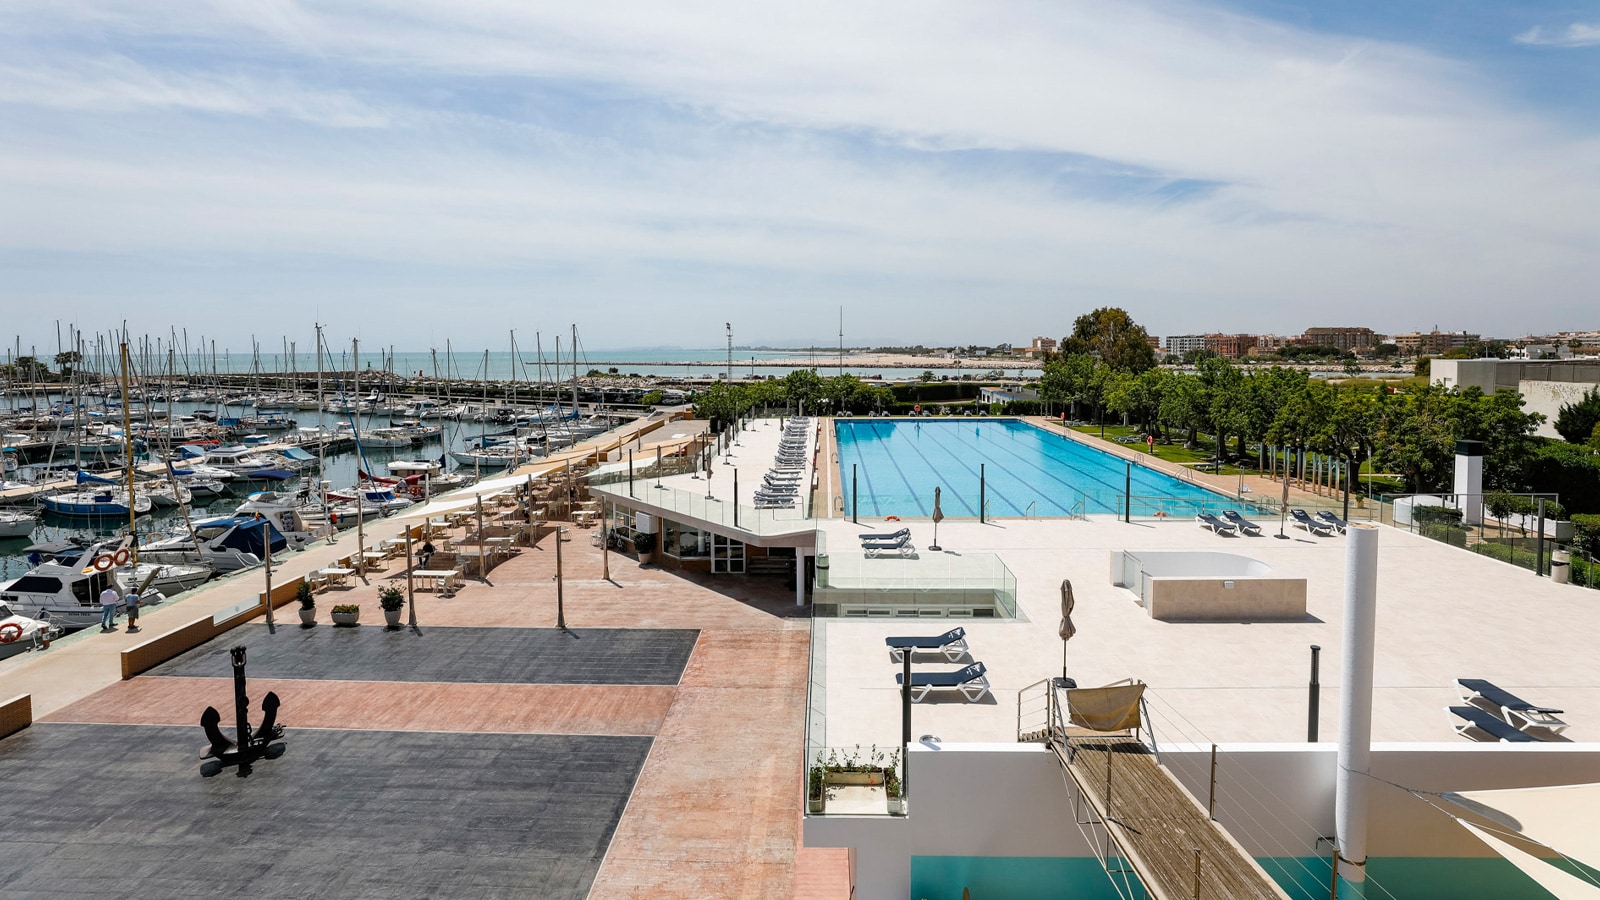 The Real Club Naútico (Royal Sailing Club) in Valencia gets a design overhaul with Porcelanosa collections